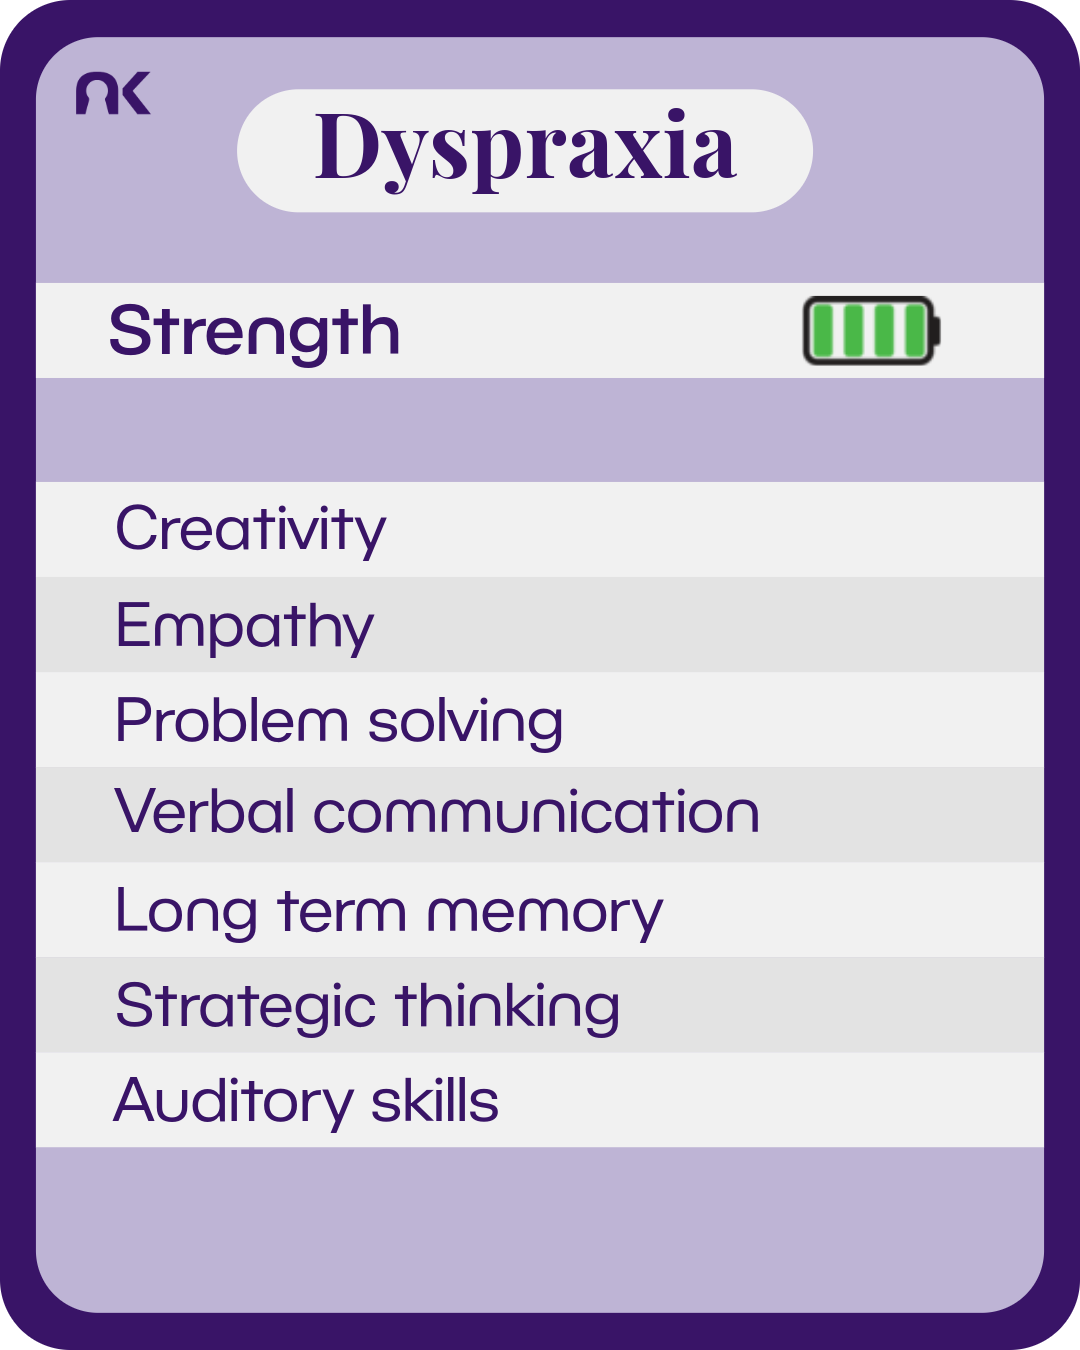 An information card made to look like it is from a card game. Next to the subtitle "strength" is a battery with green bars to show full charge. text says: "Dyspraxia. Strength. Creativity; Empathy; Problem solving; Verbal communication; Long term memory; Strategic thinking; Auditory skills."